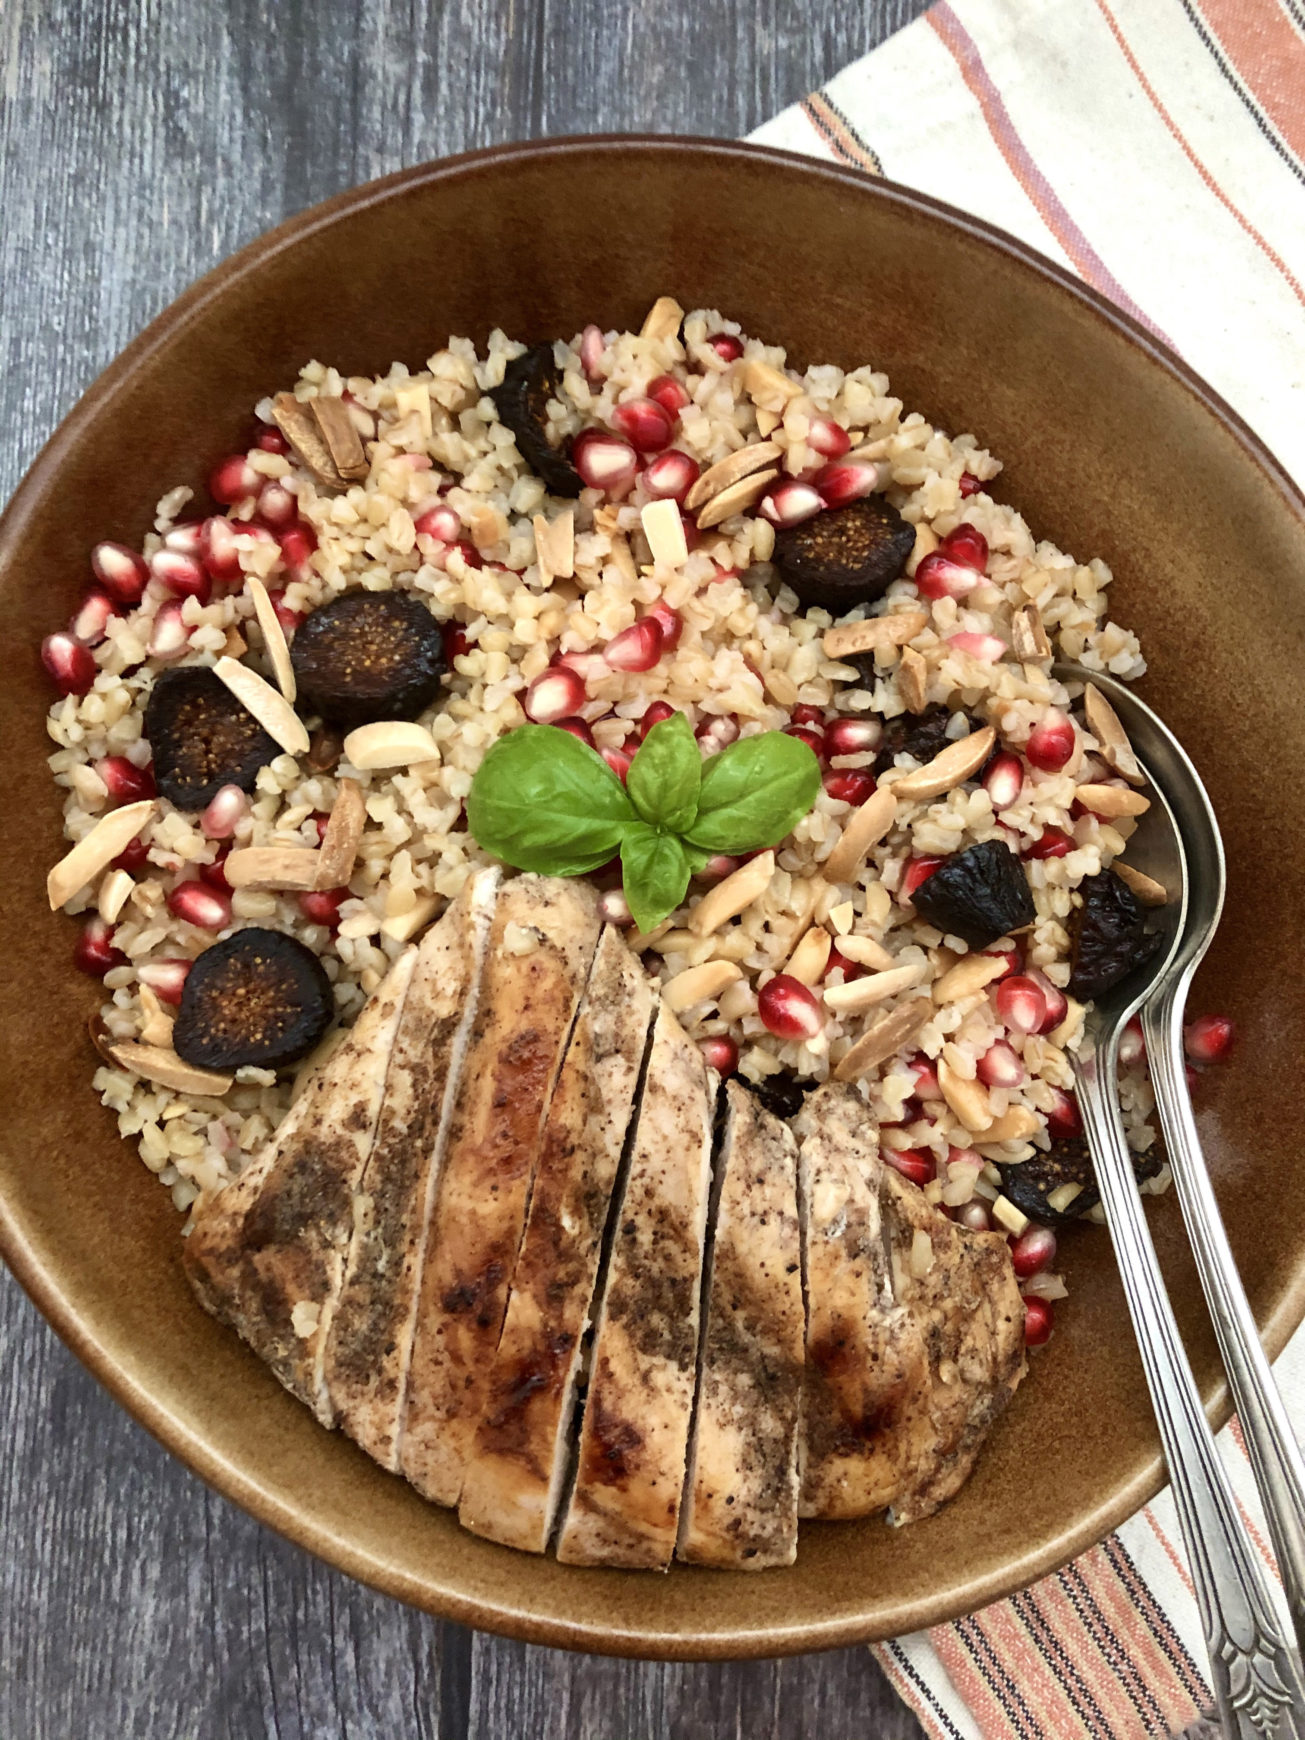 Bulgur wheat salad is a quick meal. With chicken breast, dried figs and pomegranates, this wheat bulgur recipe comes together in a pinch.